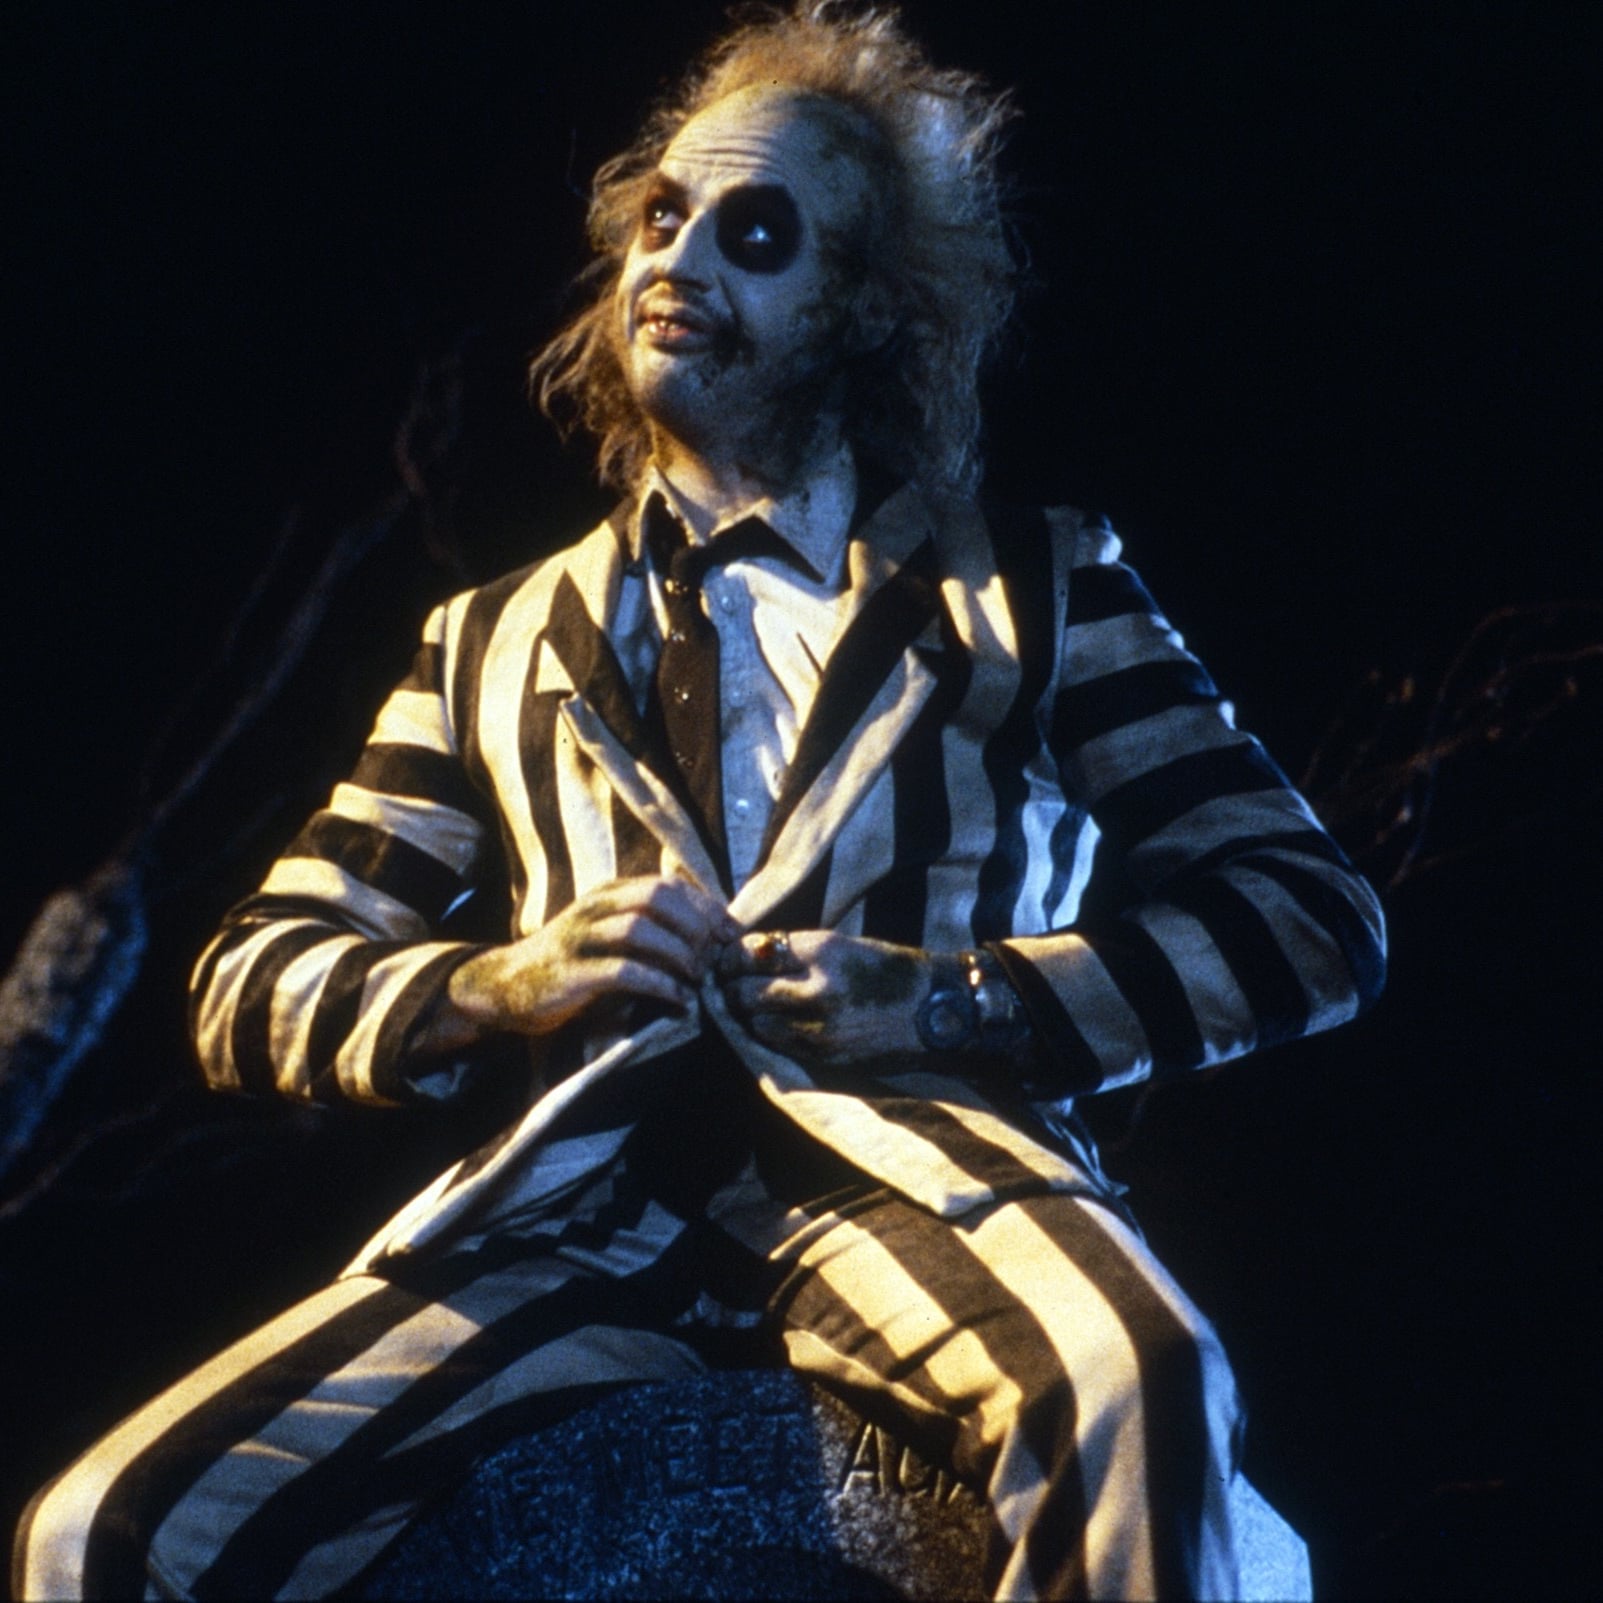 BeetleJuice</a><br> by <a href='/profile/Bling-King/'>Bling King</a>